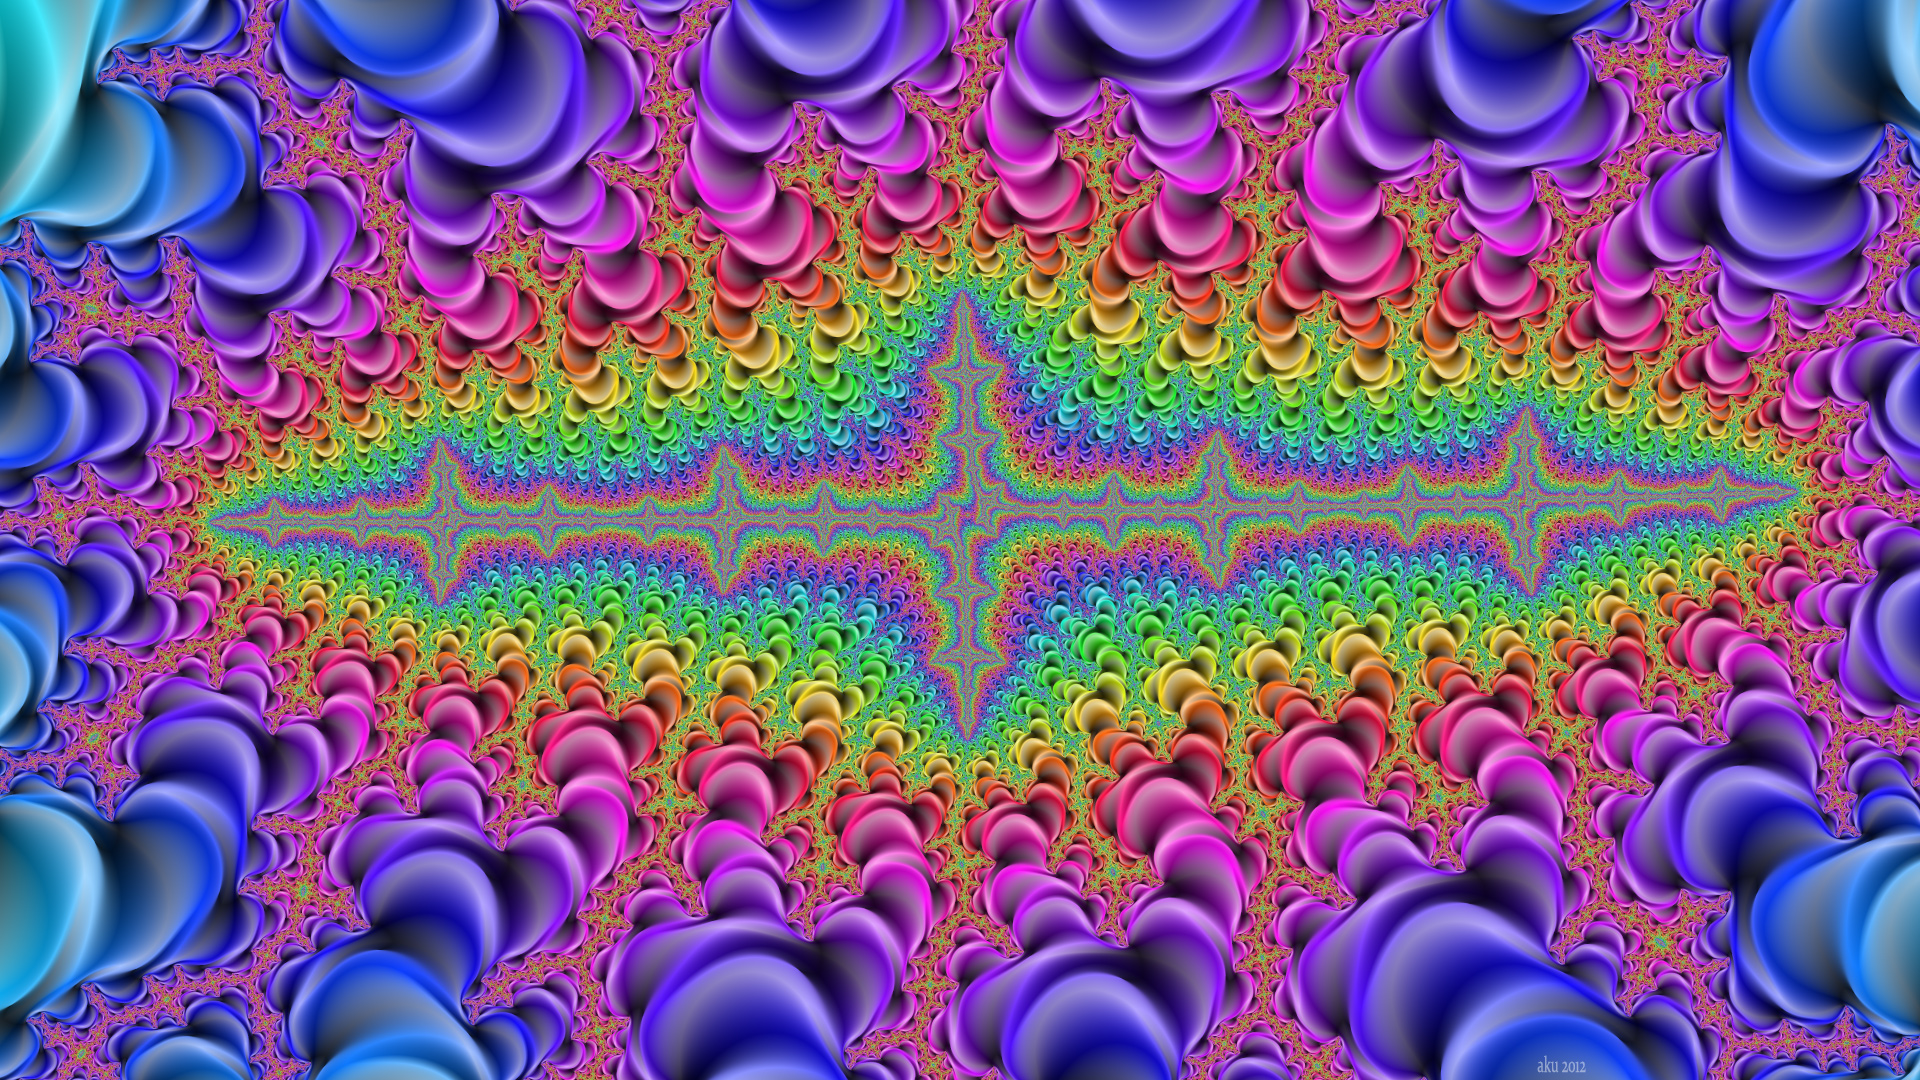 psychedelic, artistic Aesthetic wallpaper